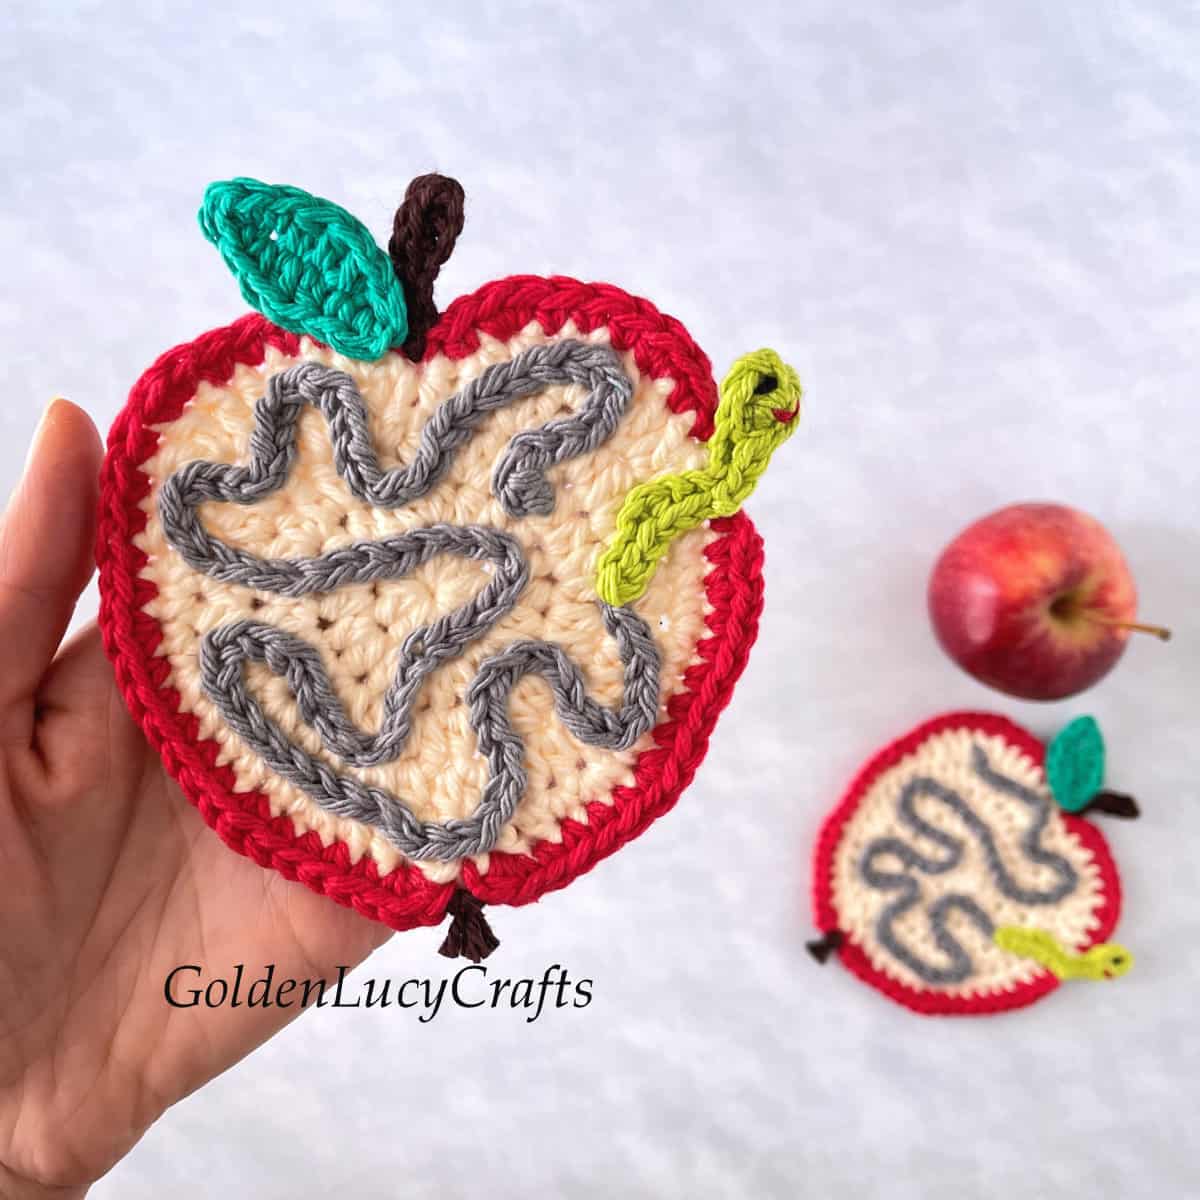 Crochet apple coaster in the palm of a hand.